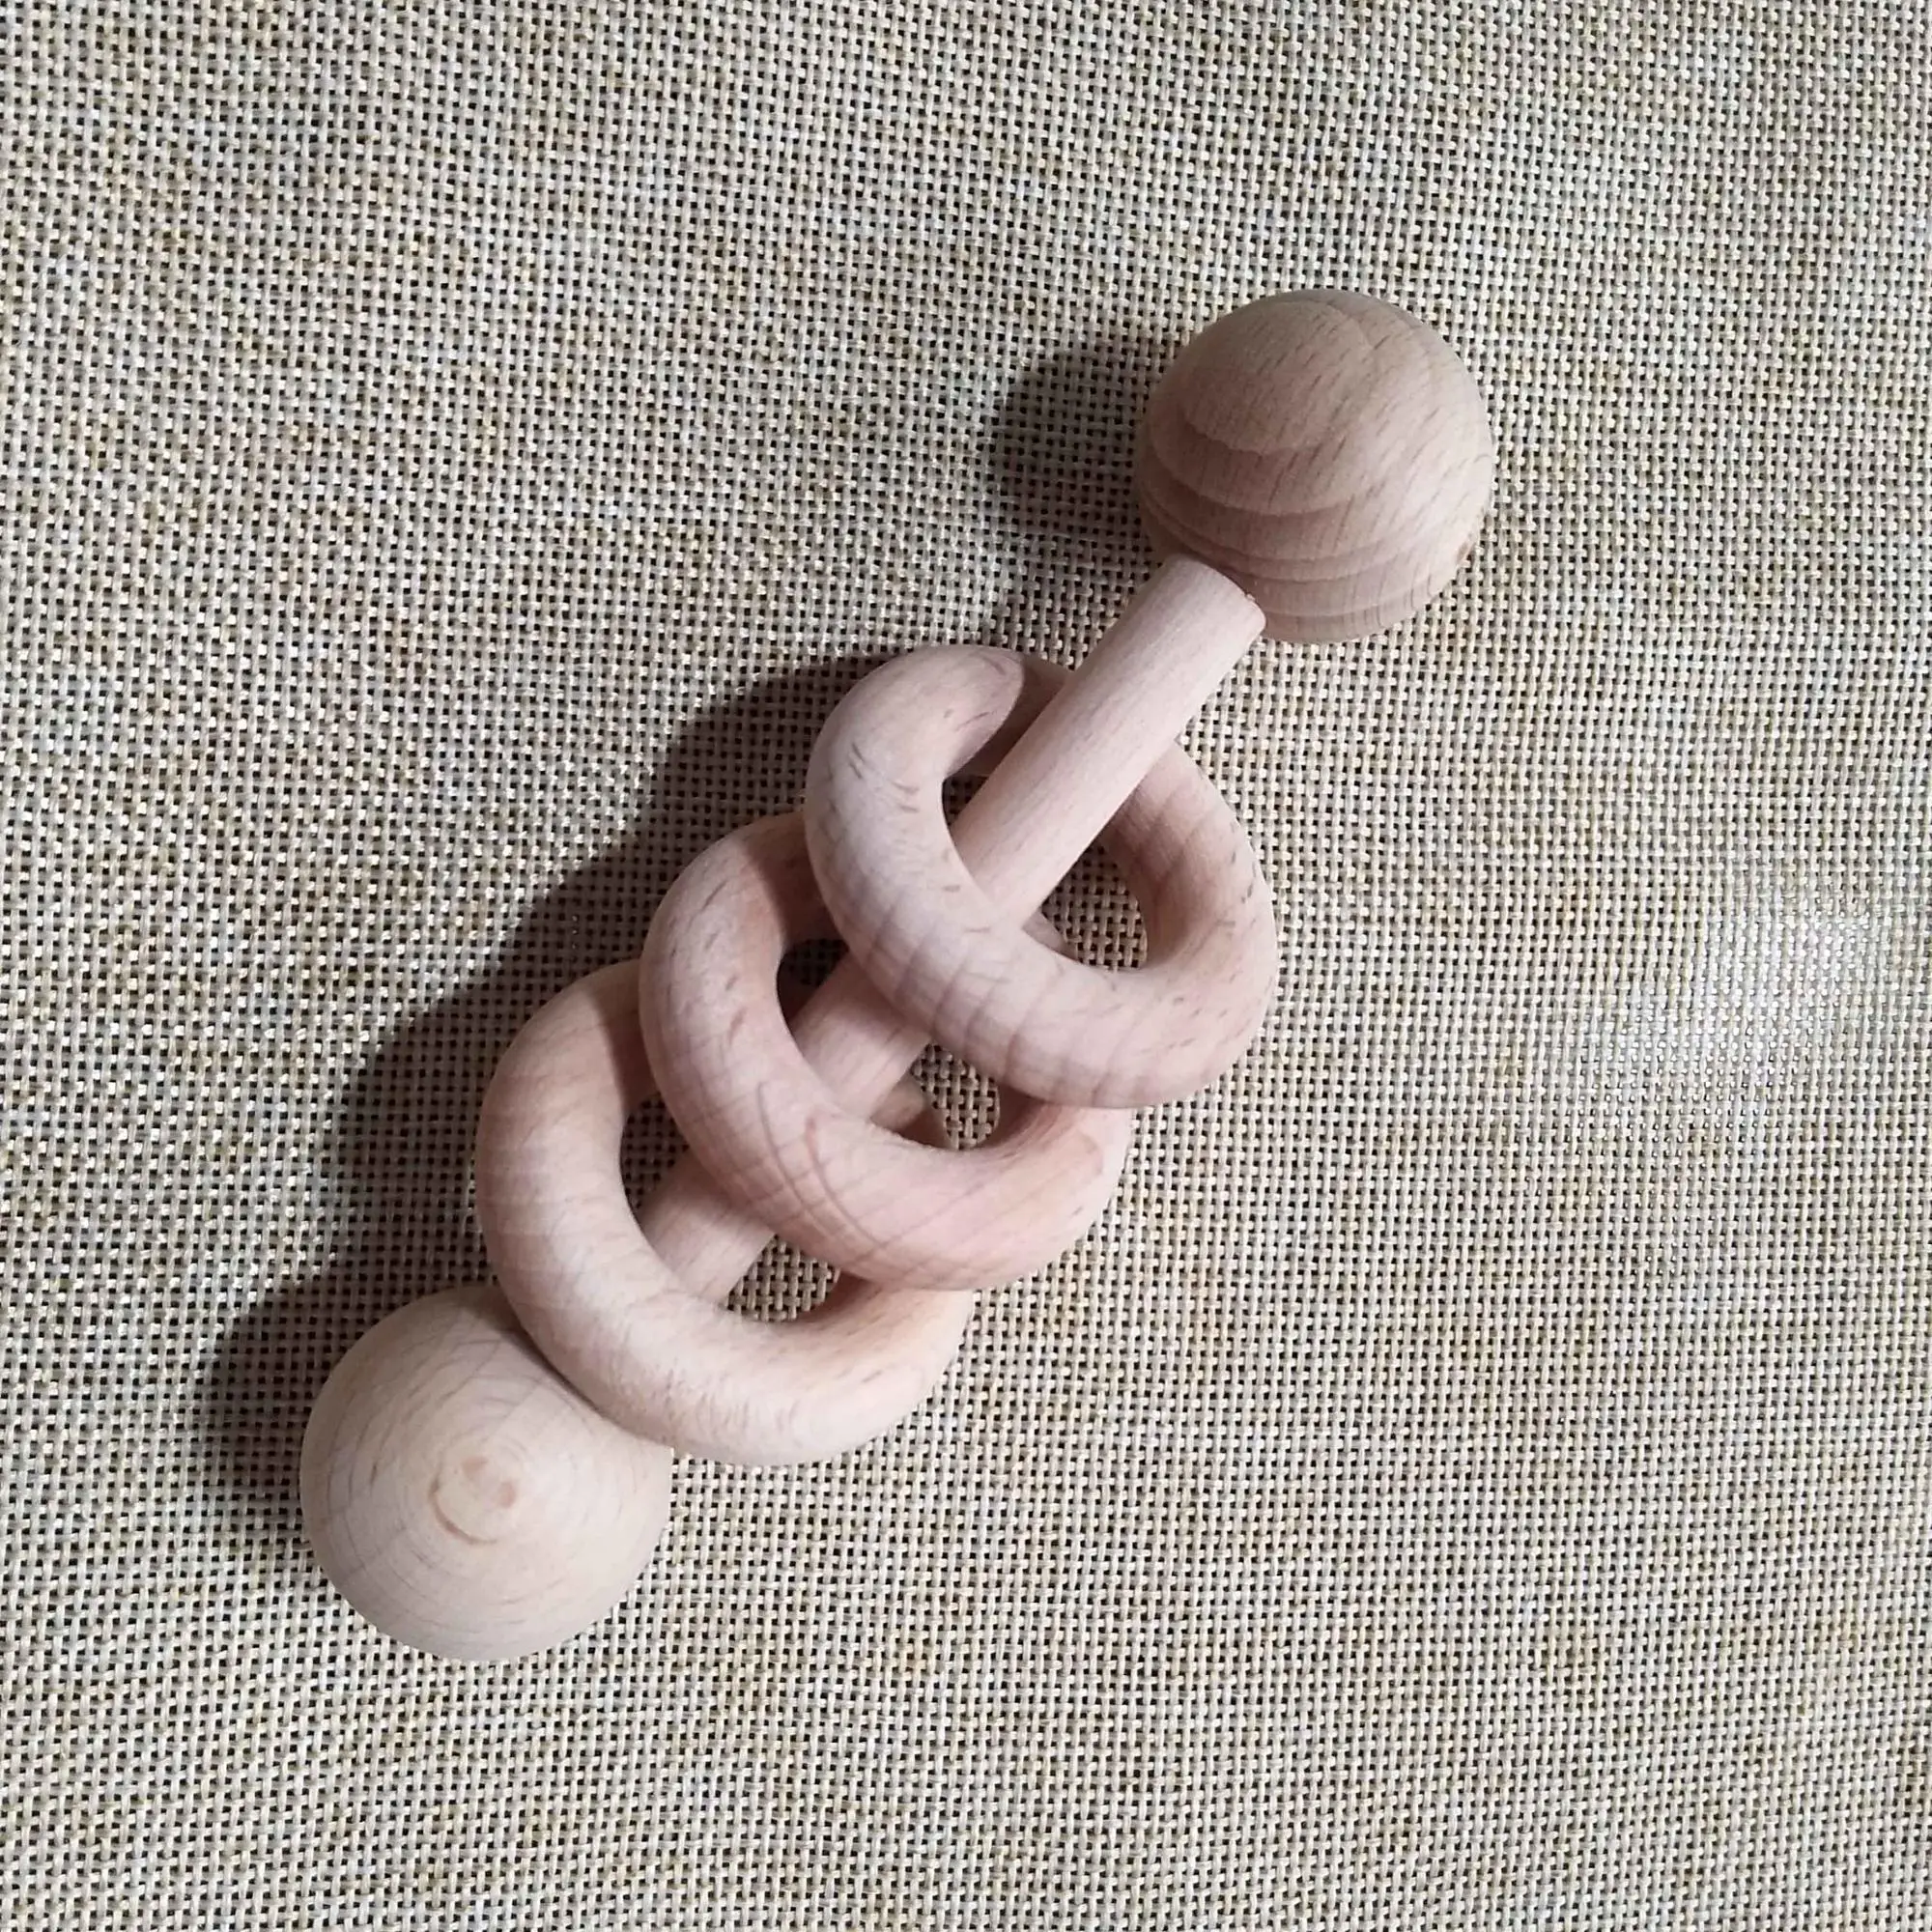 organic wooden baby toys